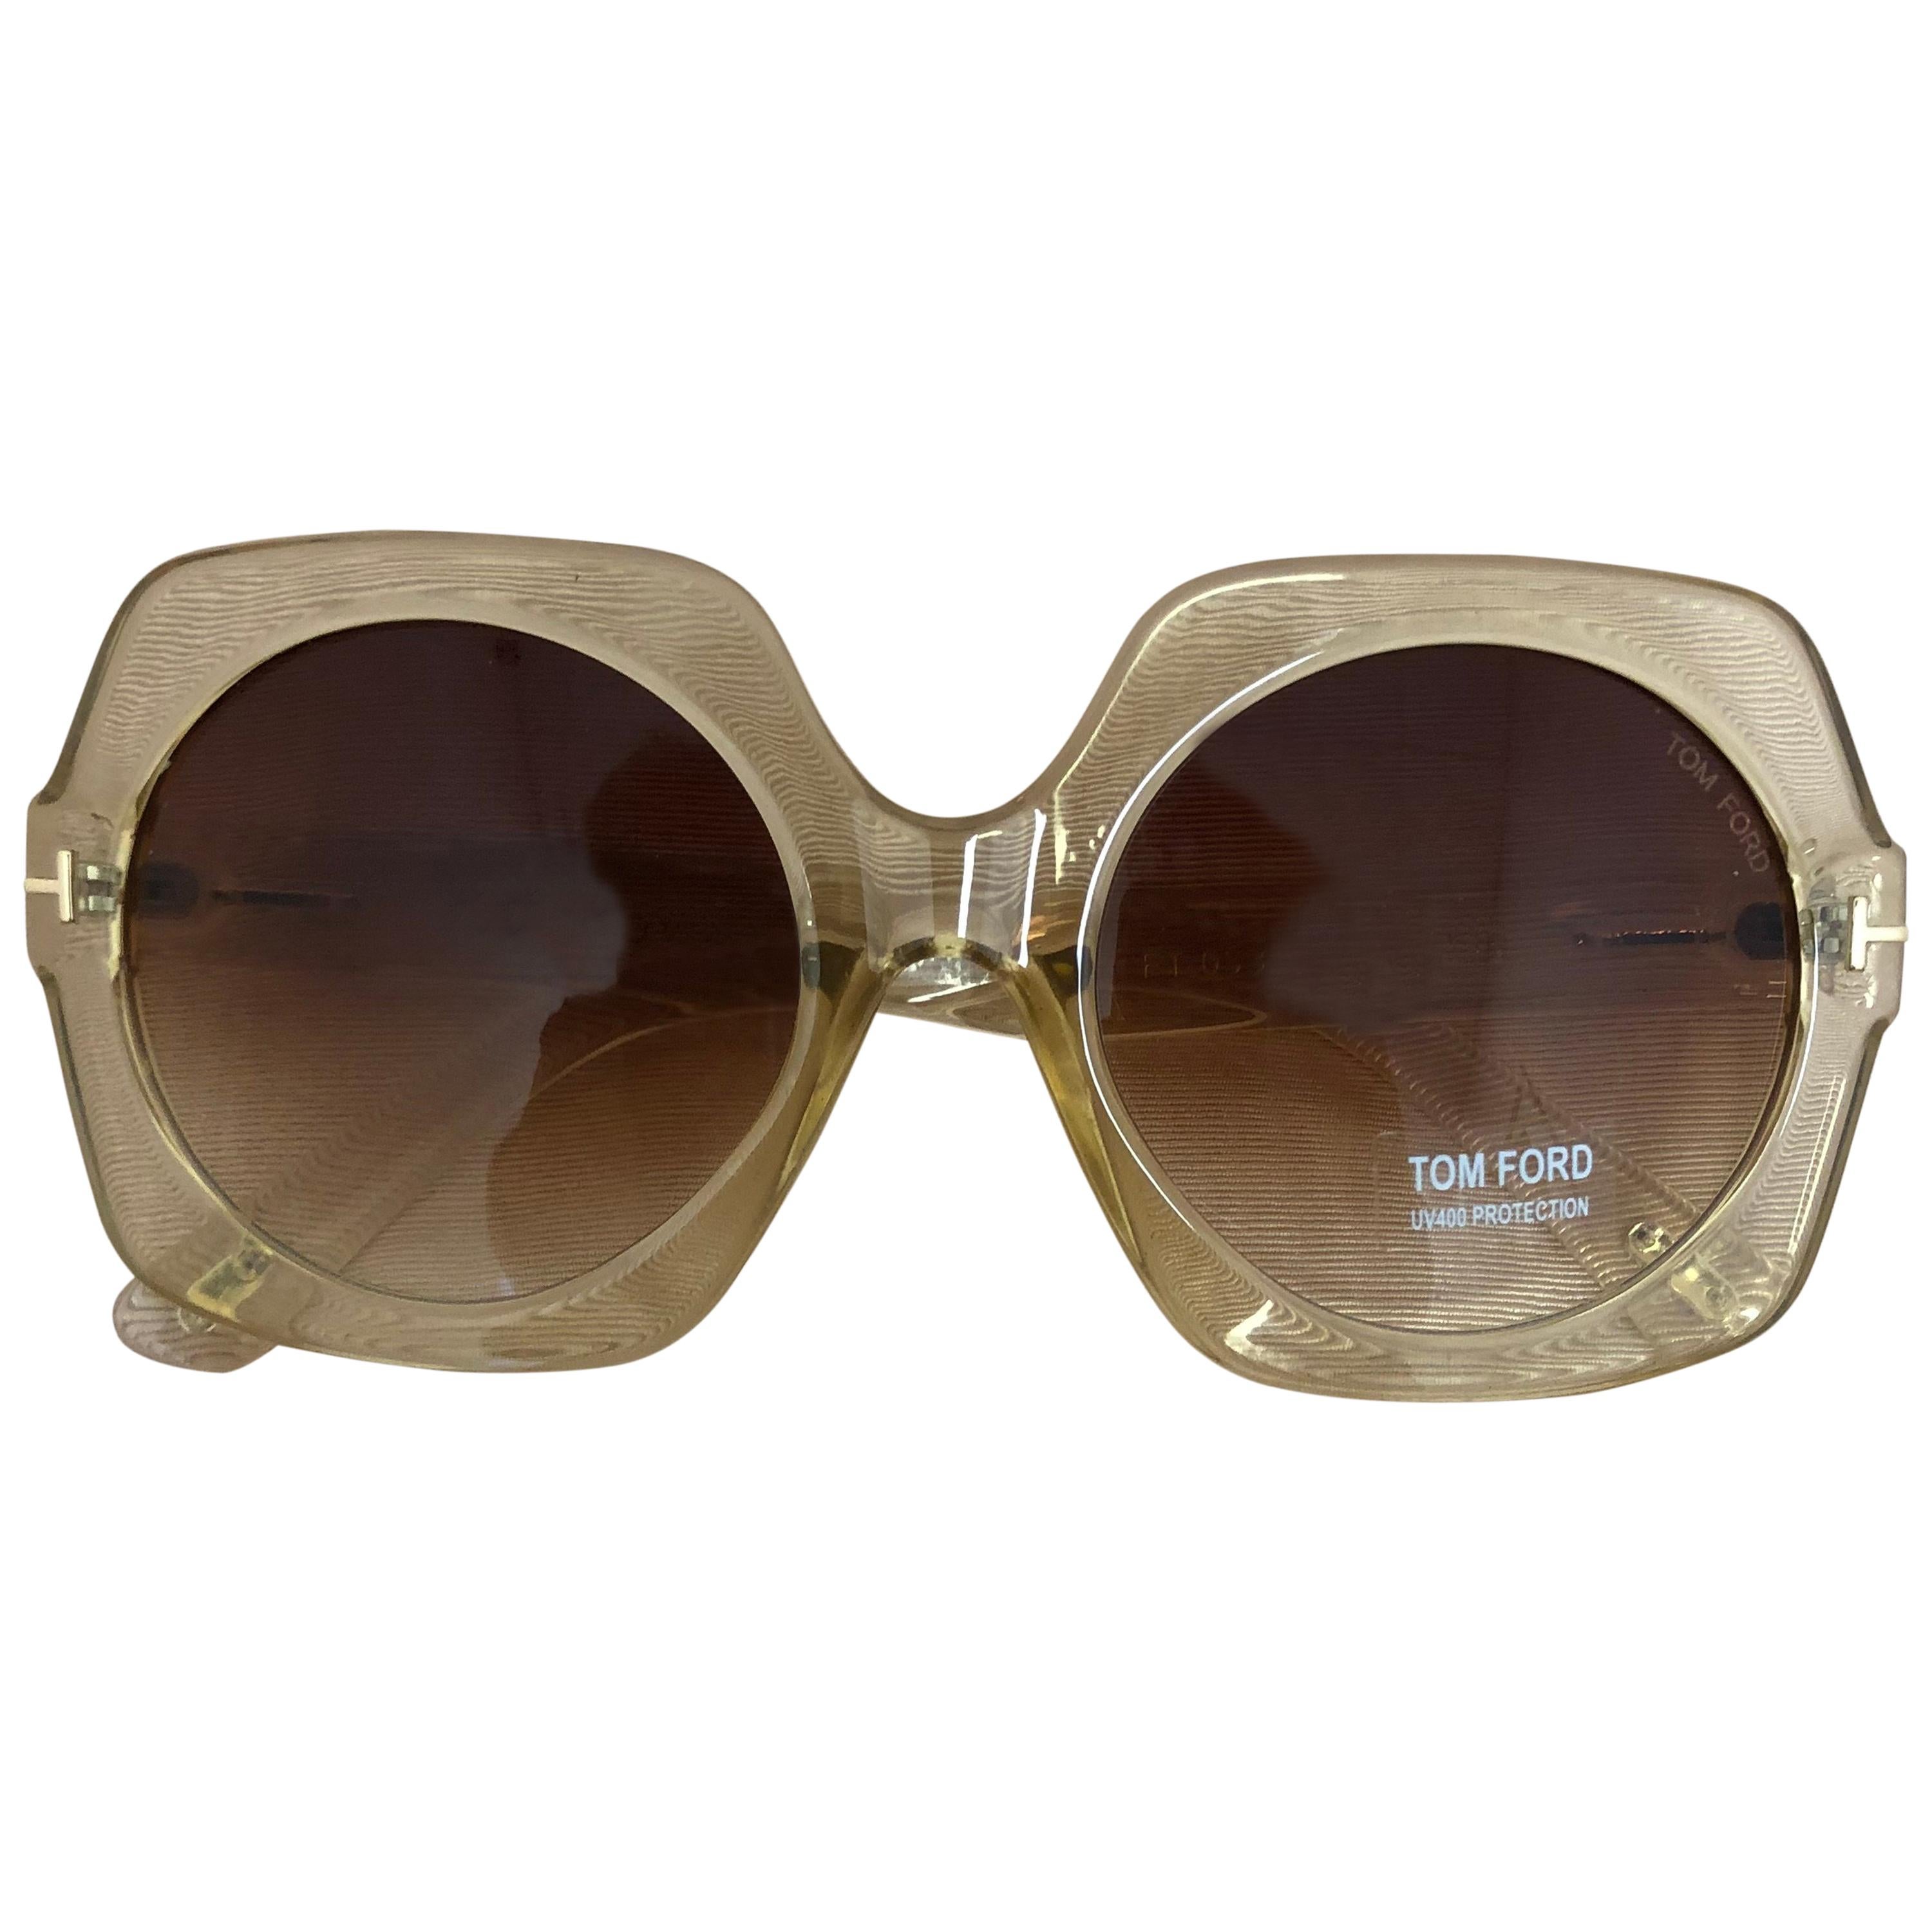 Tom Ford Sofia Sunglasses FT 0535 in Pale Gold Tone Never Worn w/Case and Box